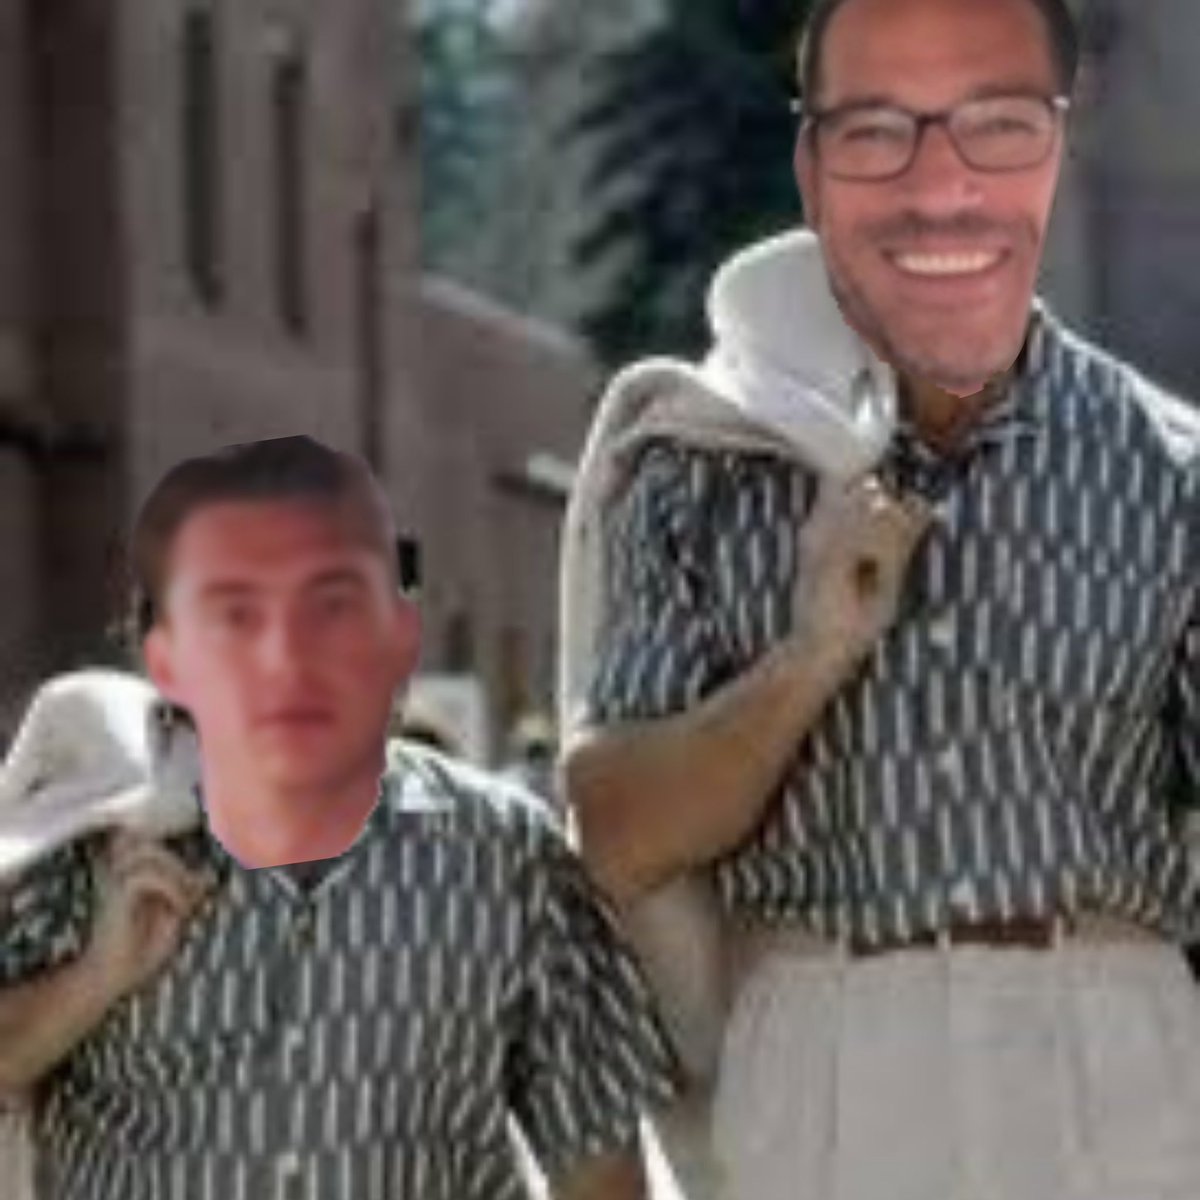 The idea stemmed from someone in #twitchchat. @GreshFauriaWEEI @christianfauria @TheRealGresh #WEEItwins